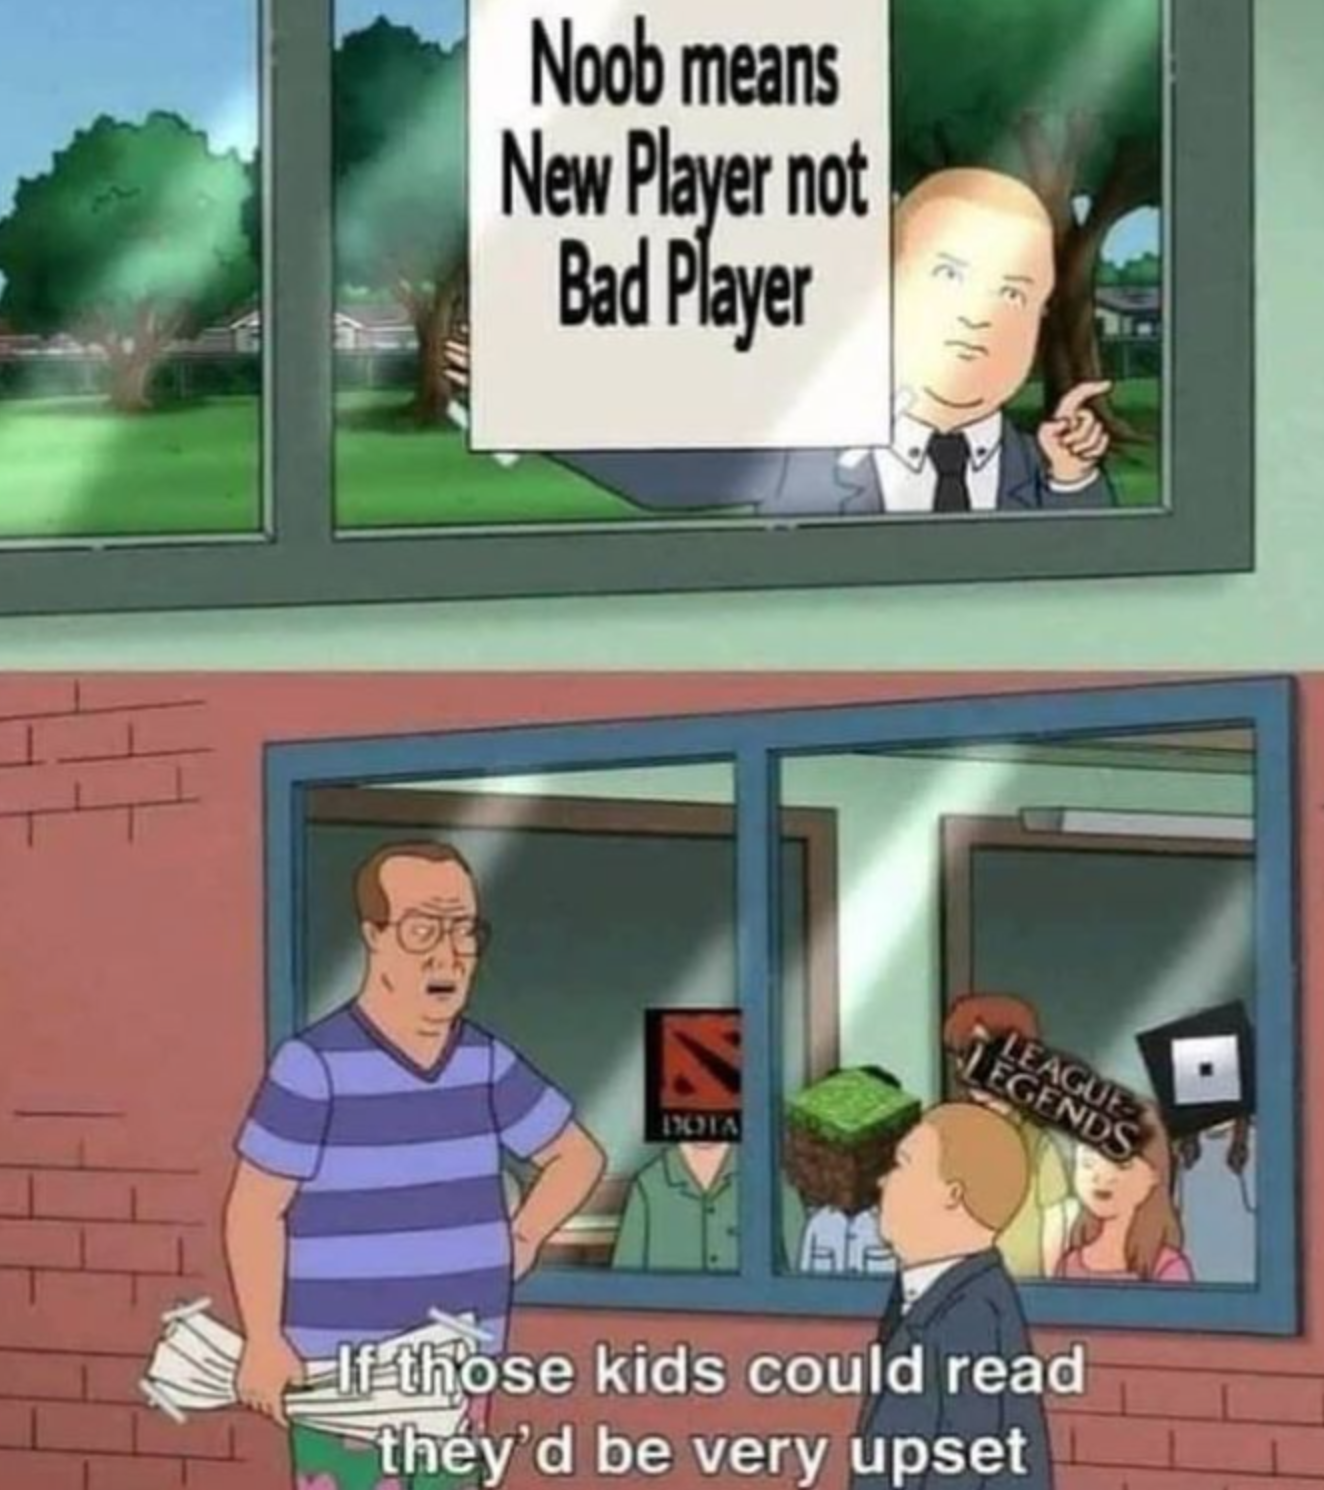 funny gaming memes - noob meme - Noob means New Player not Bad Player Legends Encia If those kids could read they'd be very upset